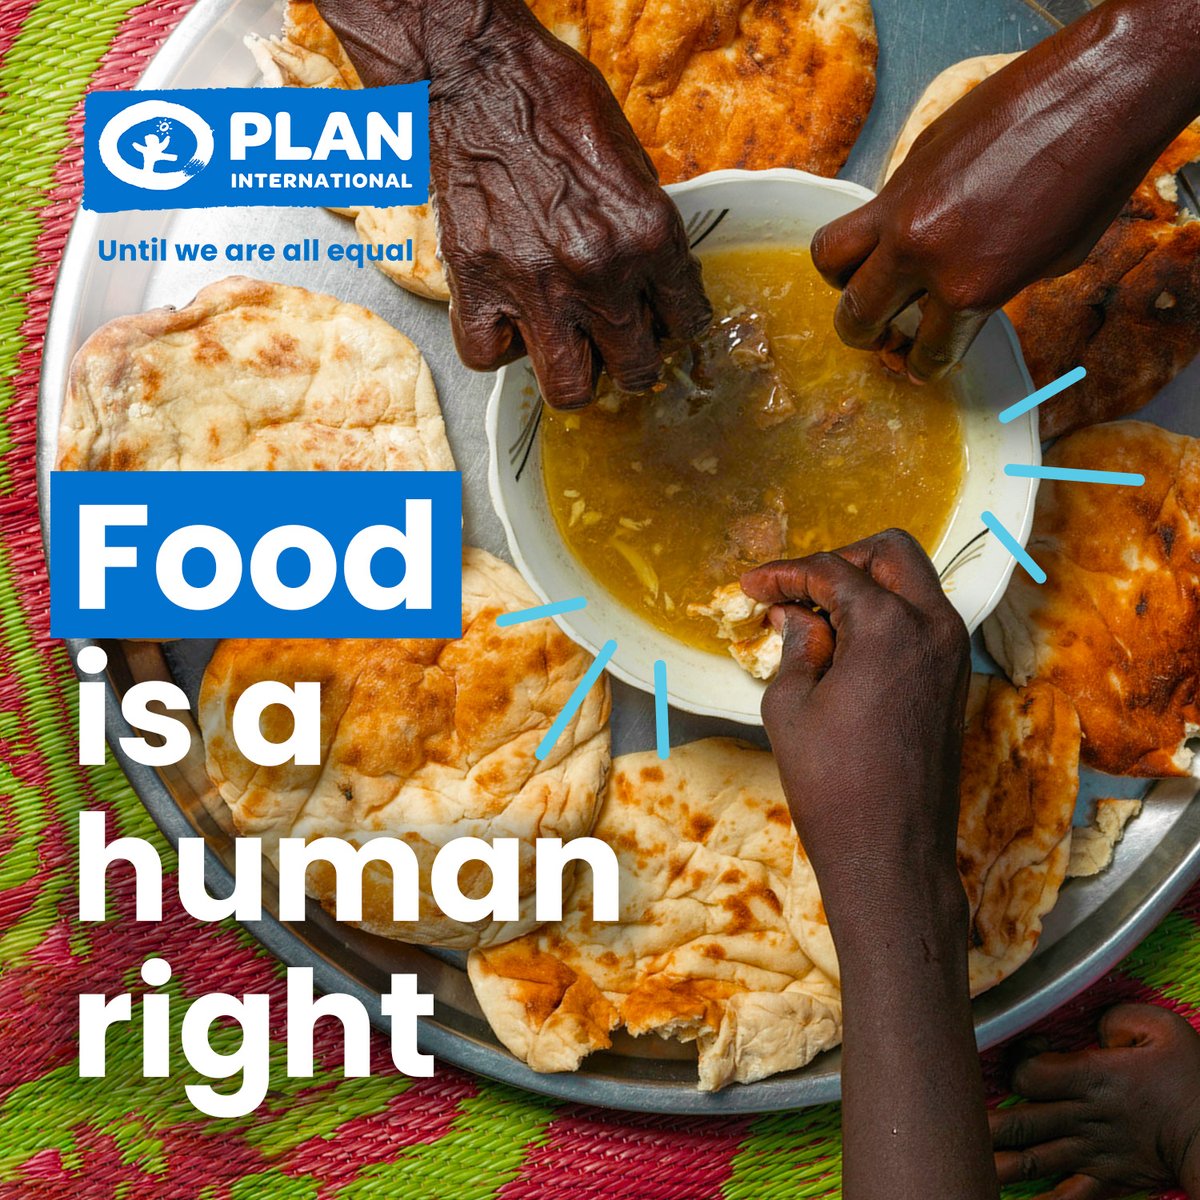 Child hunger is a violation of human rights. We have got to start seeing food as a basic human right that must be upheld. #WorldHungerDay.